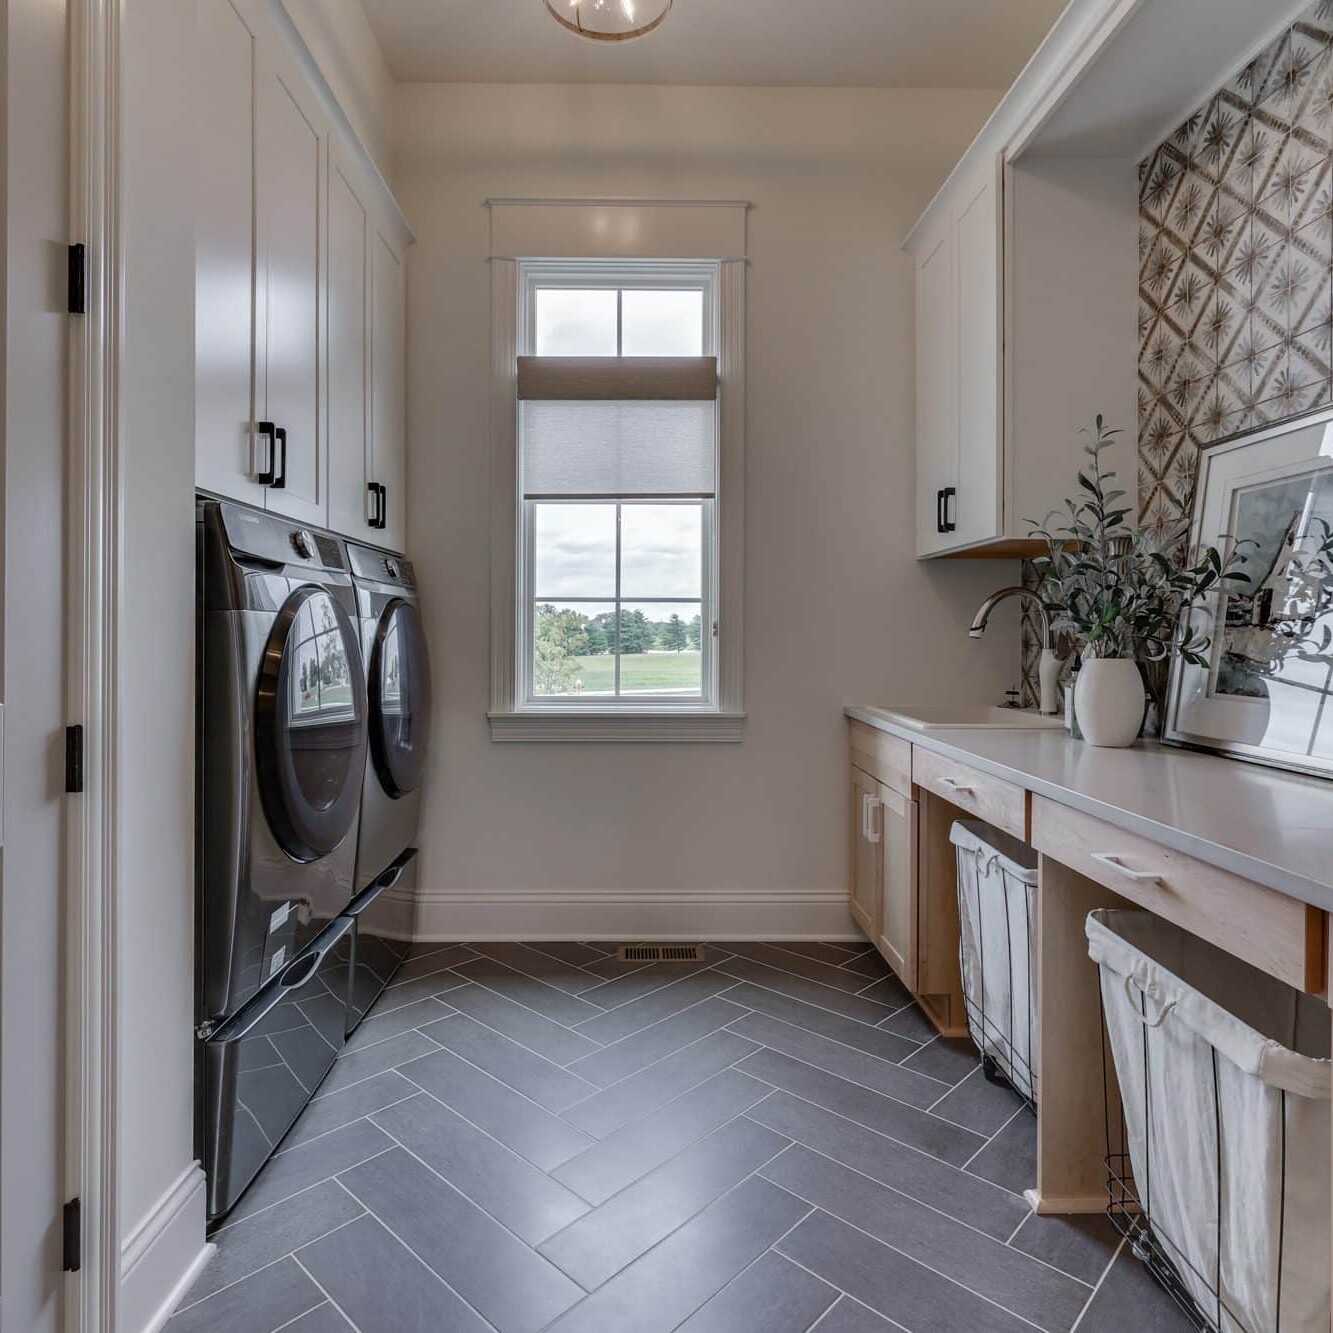 A laundry room with a washer and dryer.